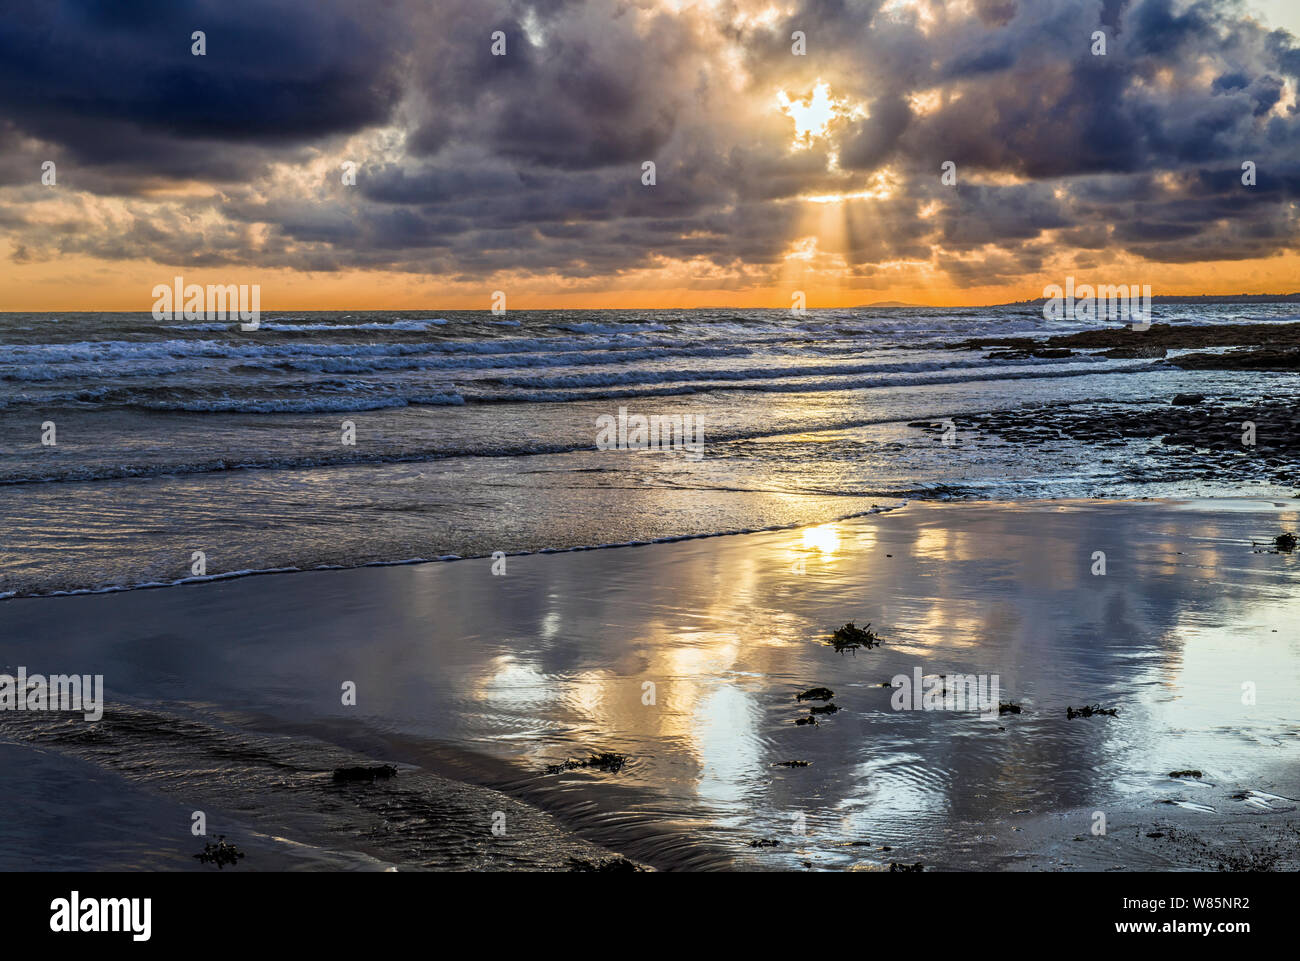 A beautiful evening sunset at Dunraven Bay on the Glamorgan Heritage Coast, south Wales, with stunning cloud reflections in the wet sand. Stock Photo